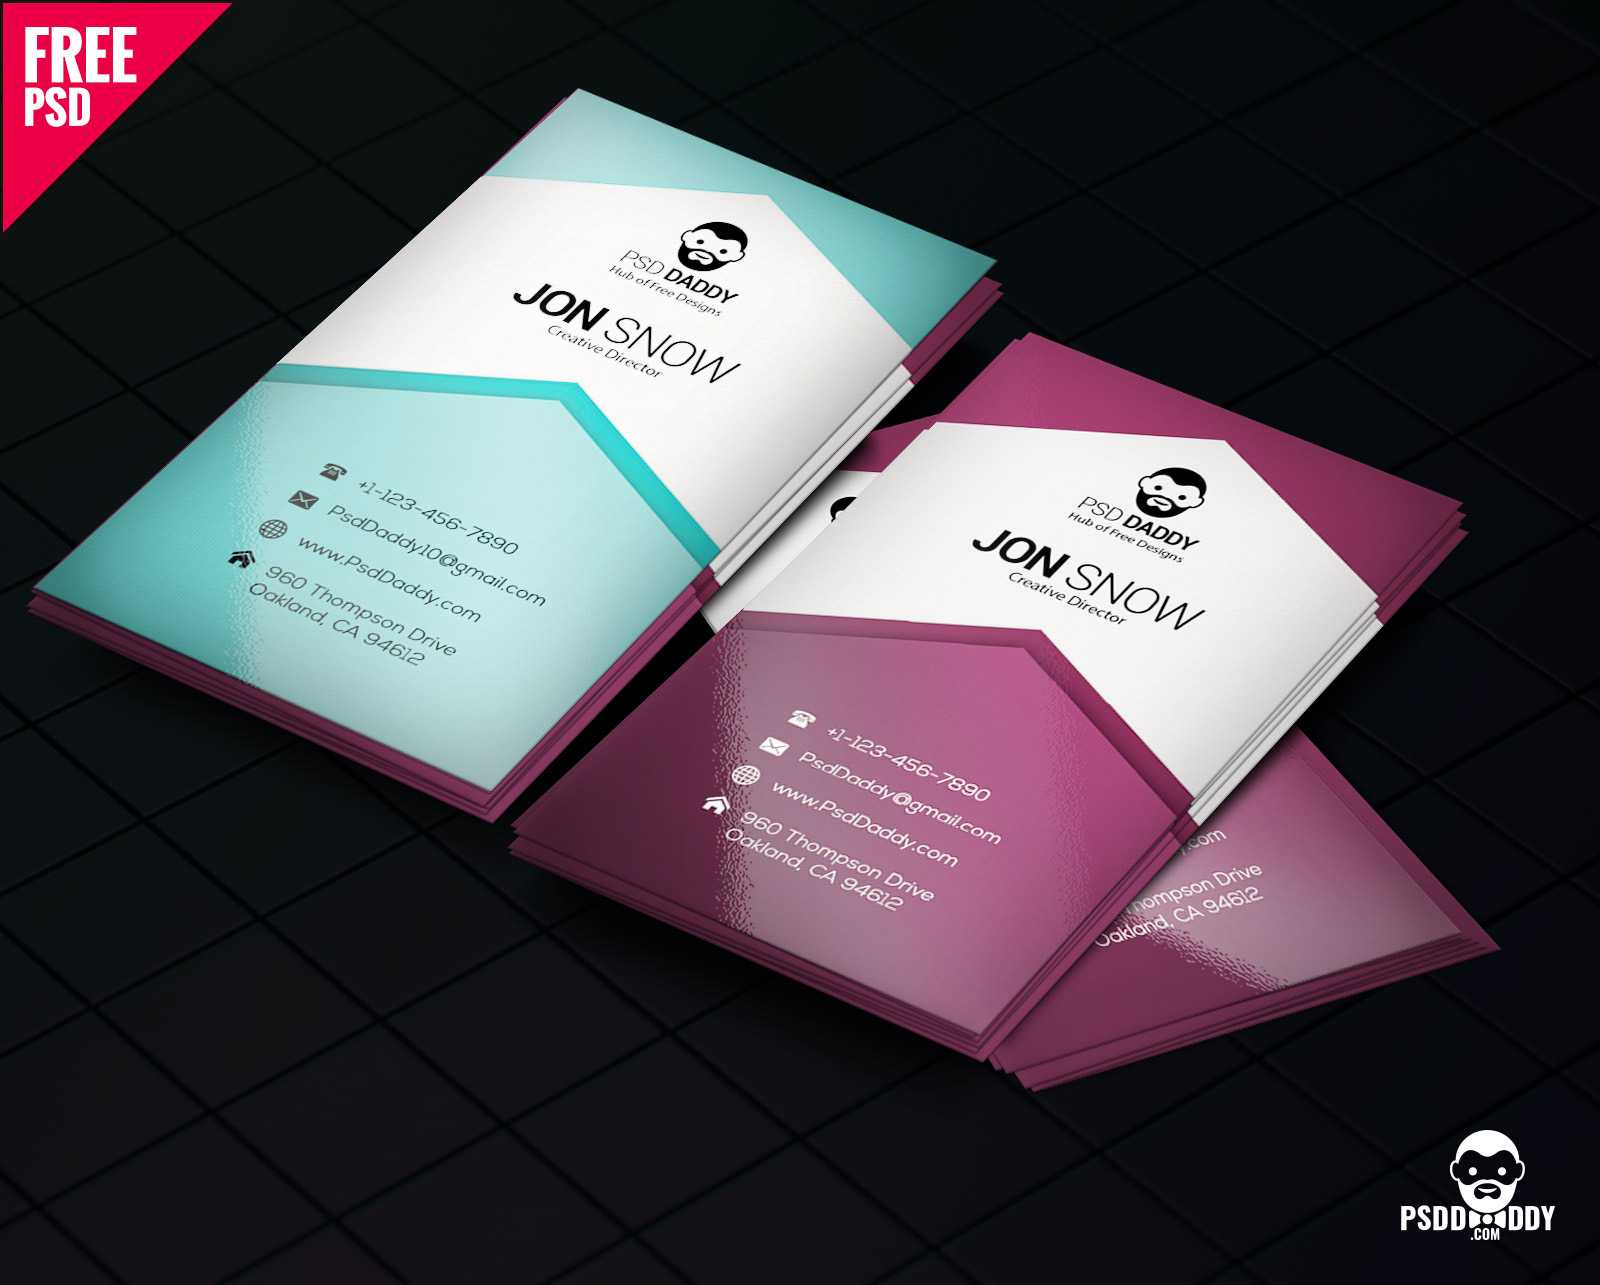 Download]Creative Business Card Psd Free | Psddaddy With Business Card Maker Template